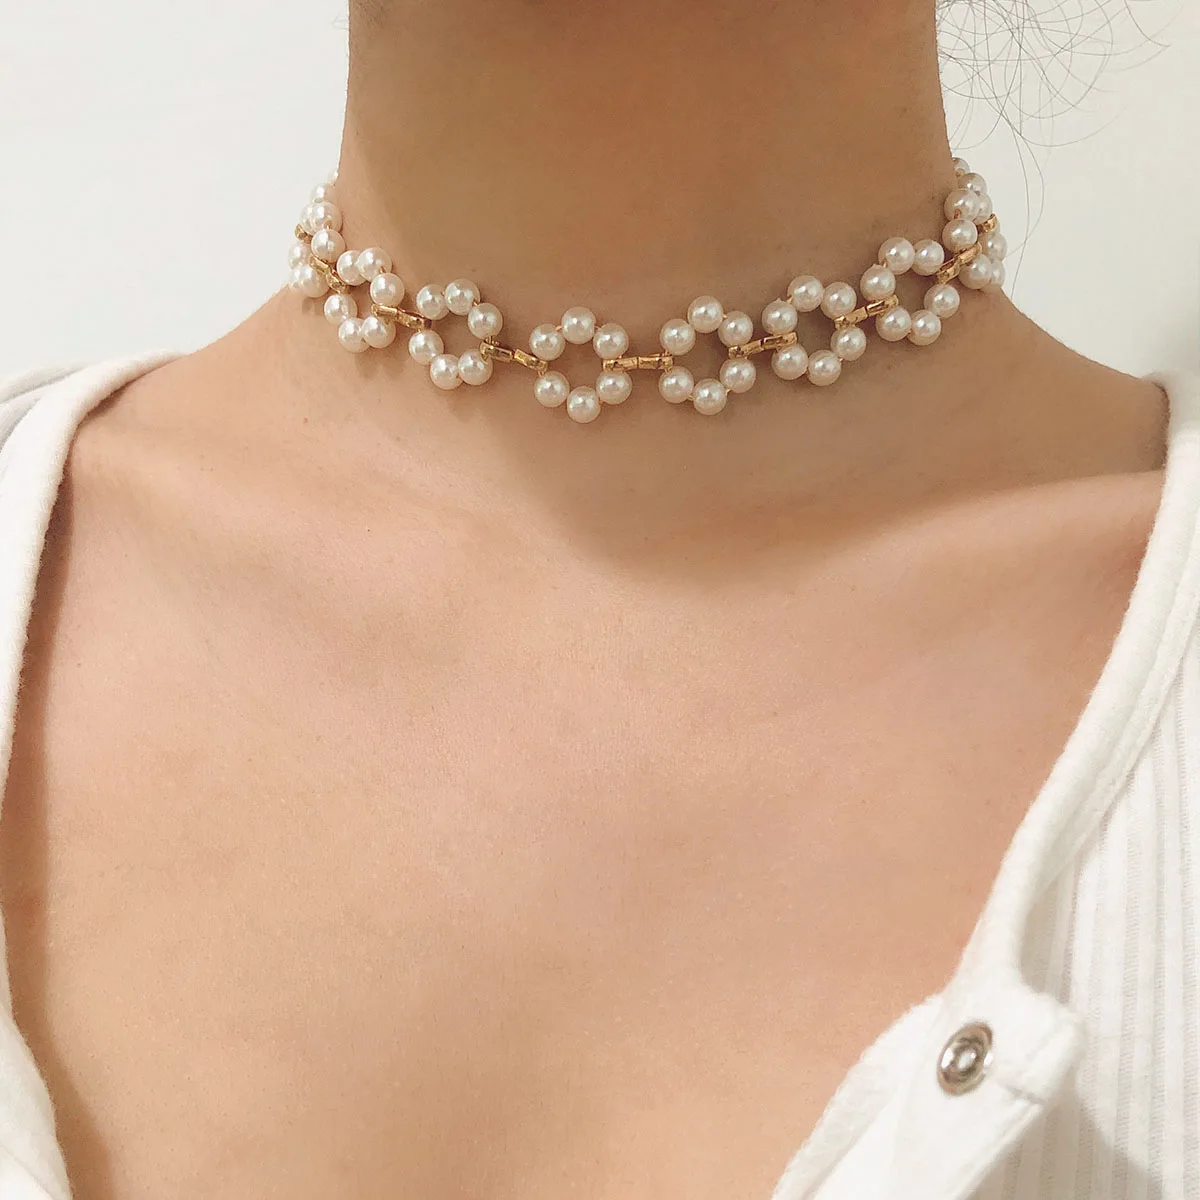 The Floral Pearl Choker